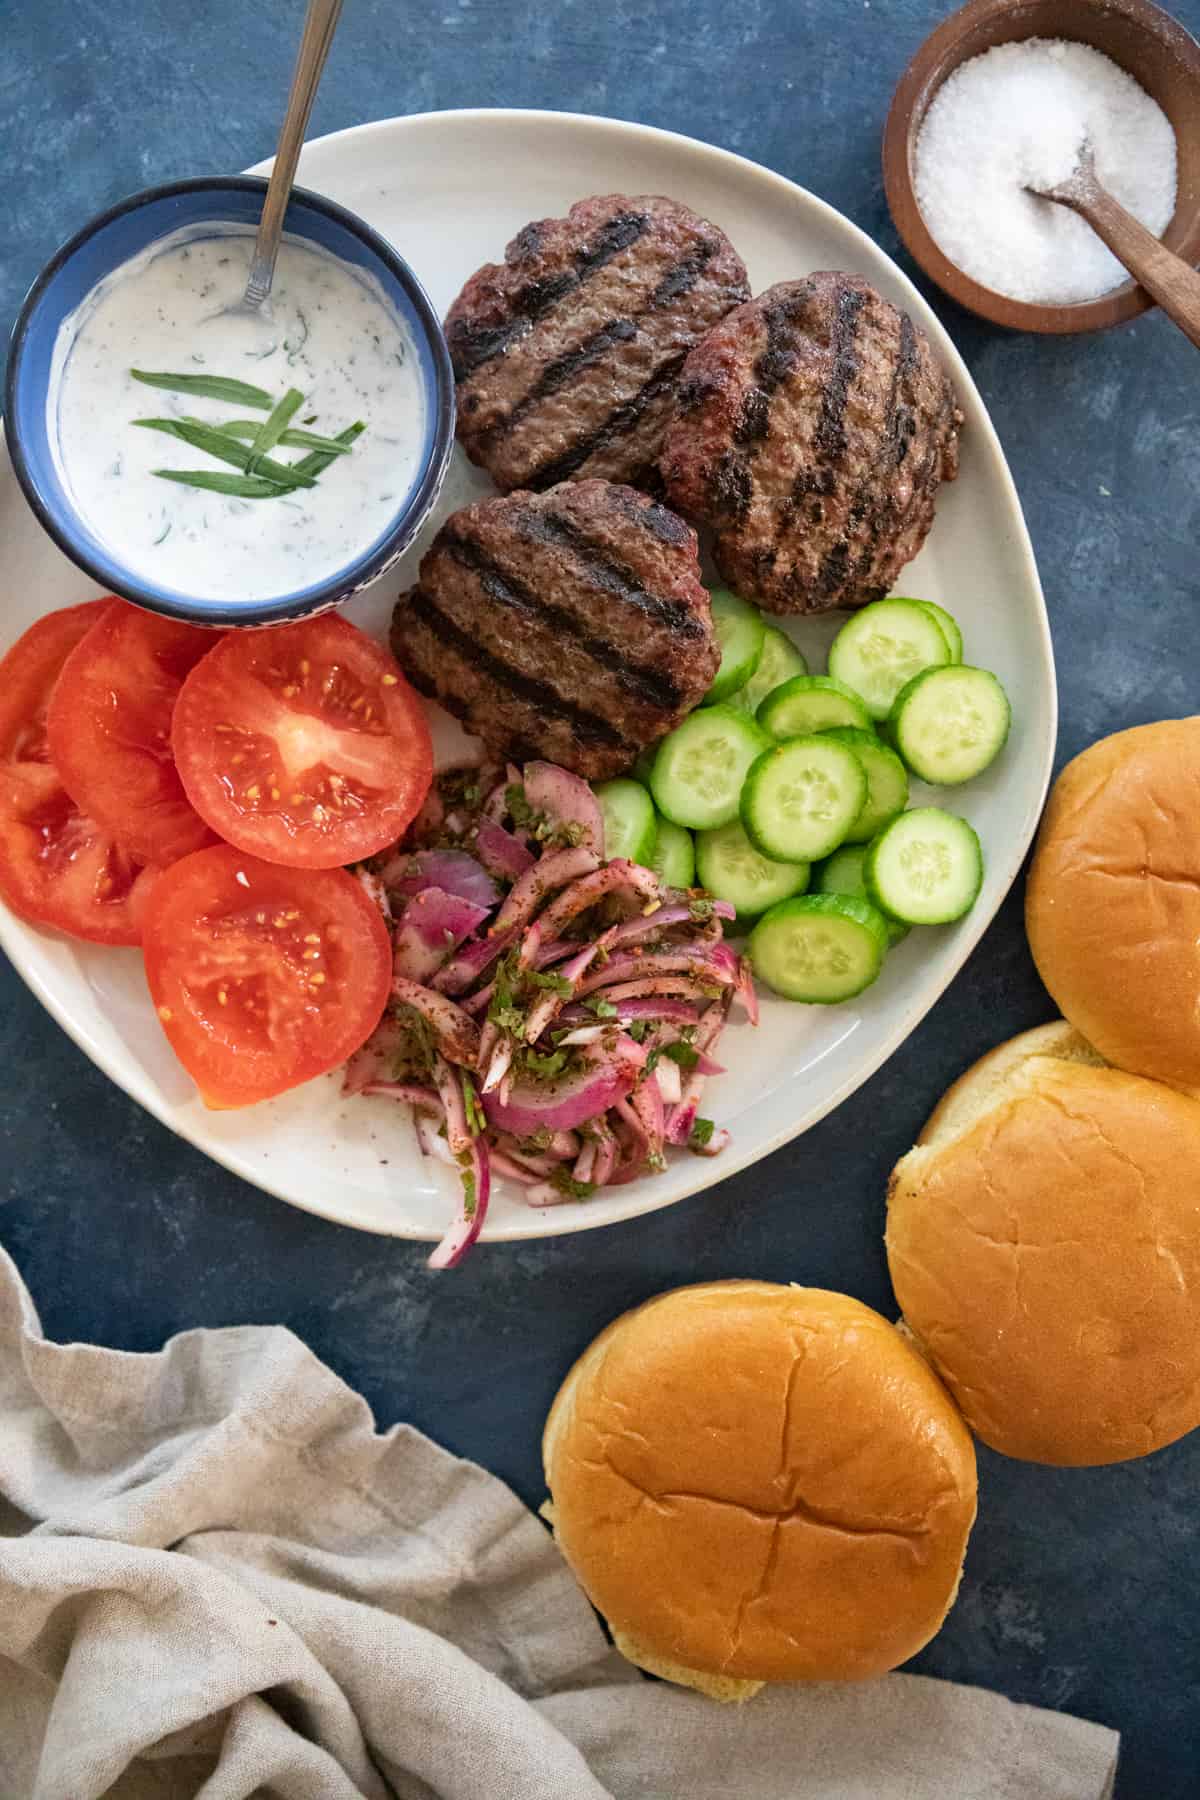 This grilled lamb burger is juicy, easy and ready in 20 minutes. It's seasoned with Mediterranean spices and served with sumac onions and a tasty yogurt sauce.
